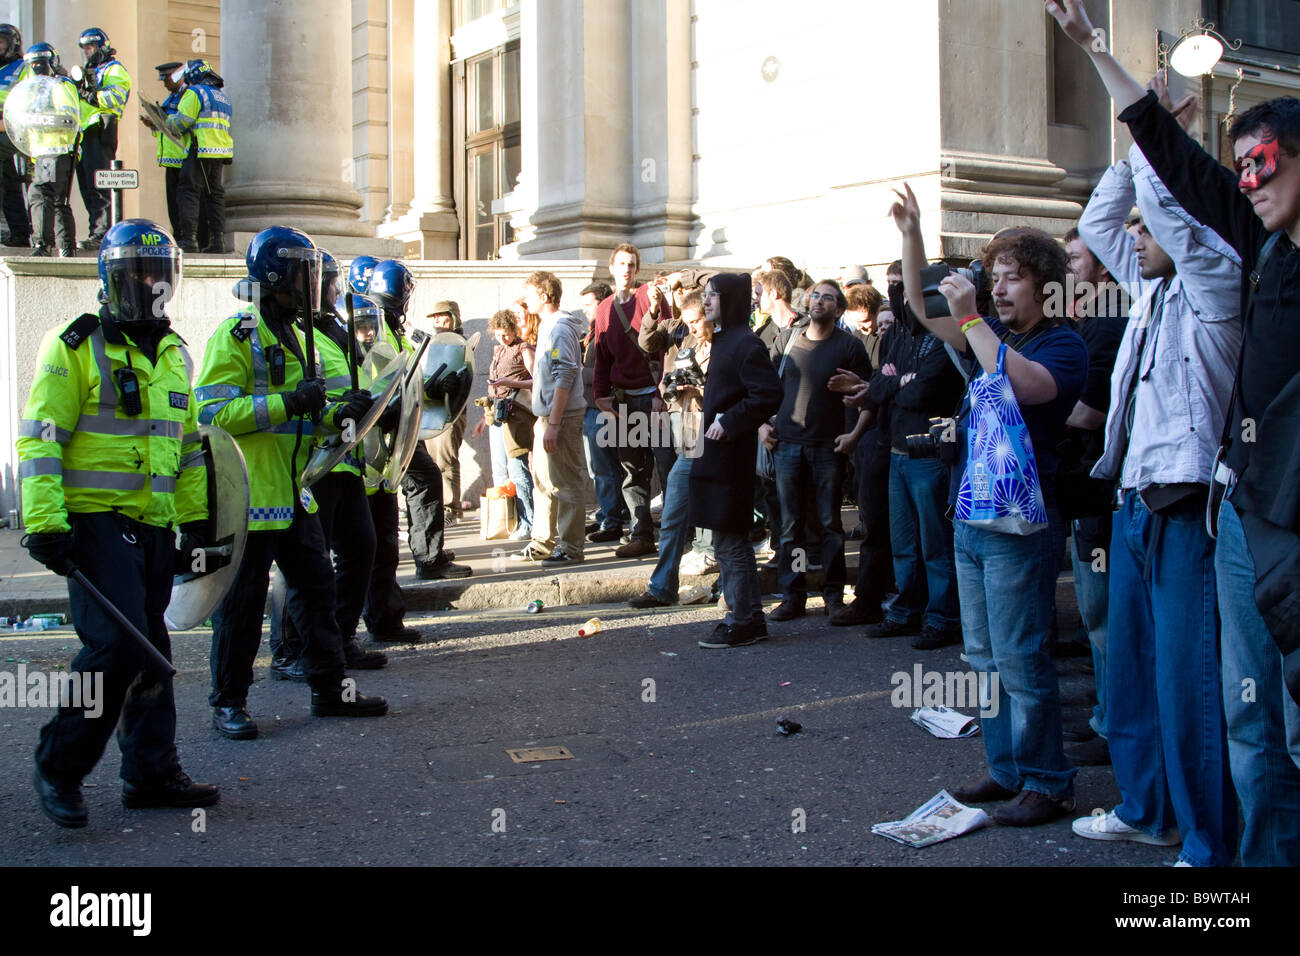 Riot Police and Protesters at G20 summit protests Cornhill Street City of London UK Stock Photo